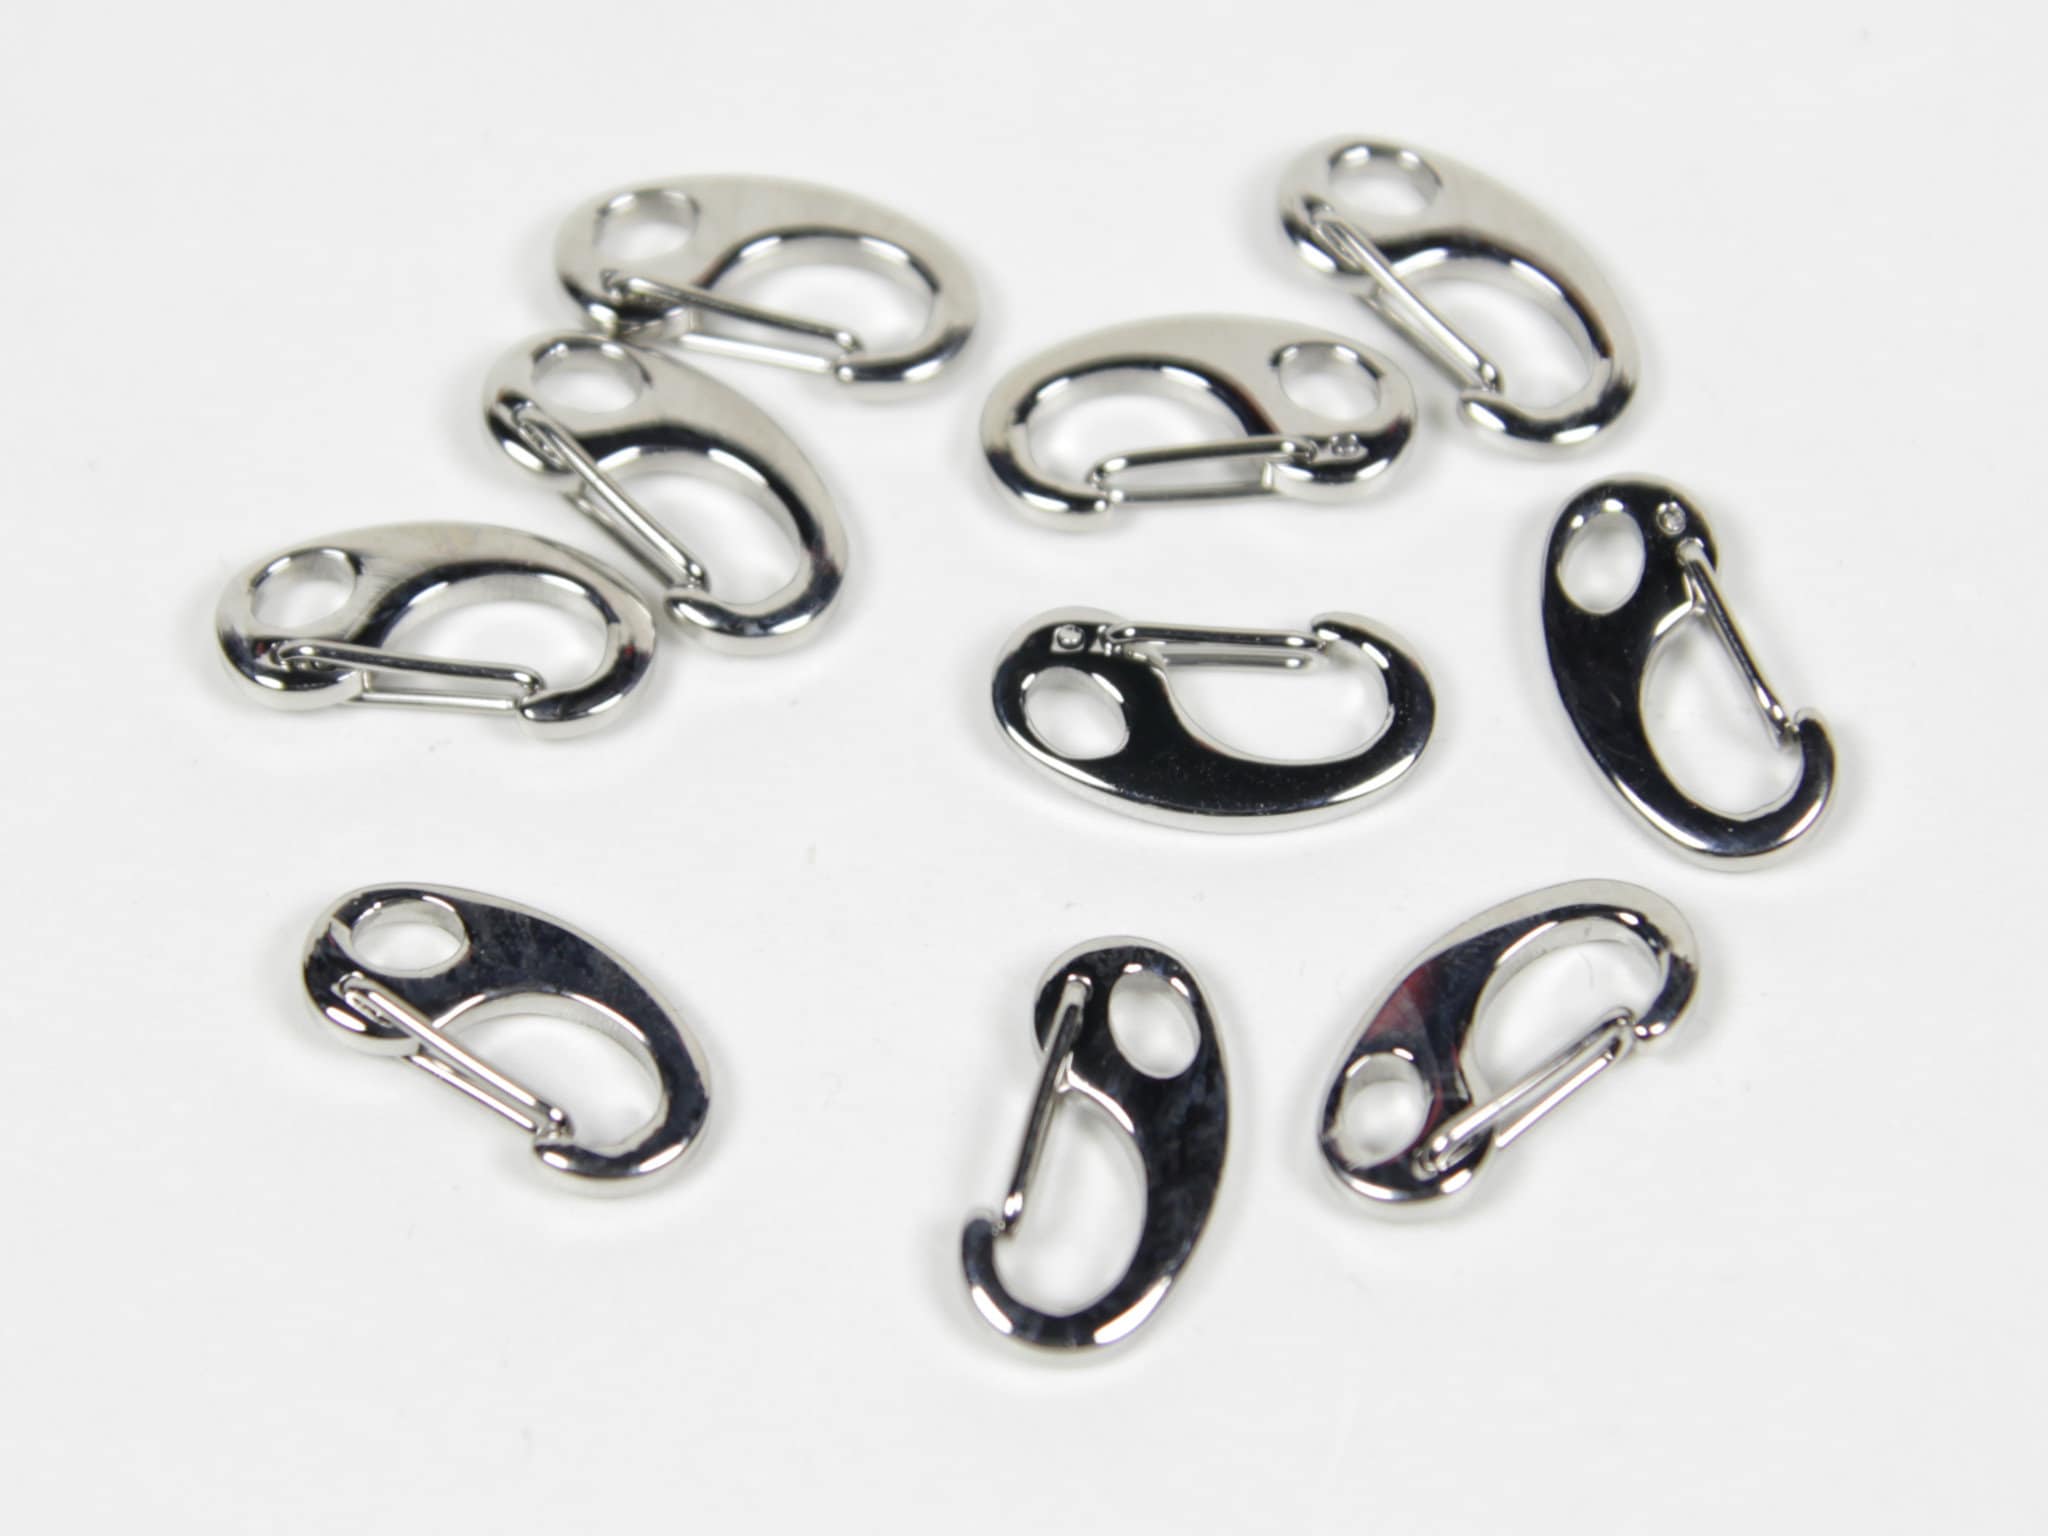 50pcs/Lot Mixed 9 Color 10-21mm Alloy Lobster Clasp Hooks For Jewelry  Making Necklace bracelet Chain DIY Supplies Accessories